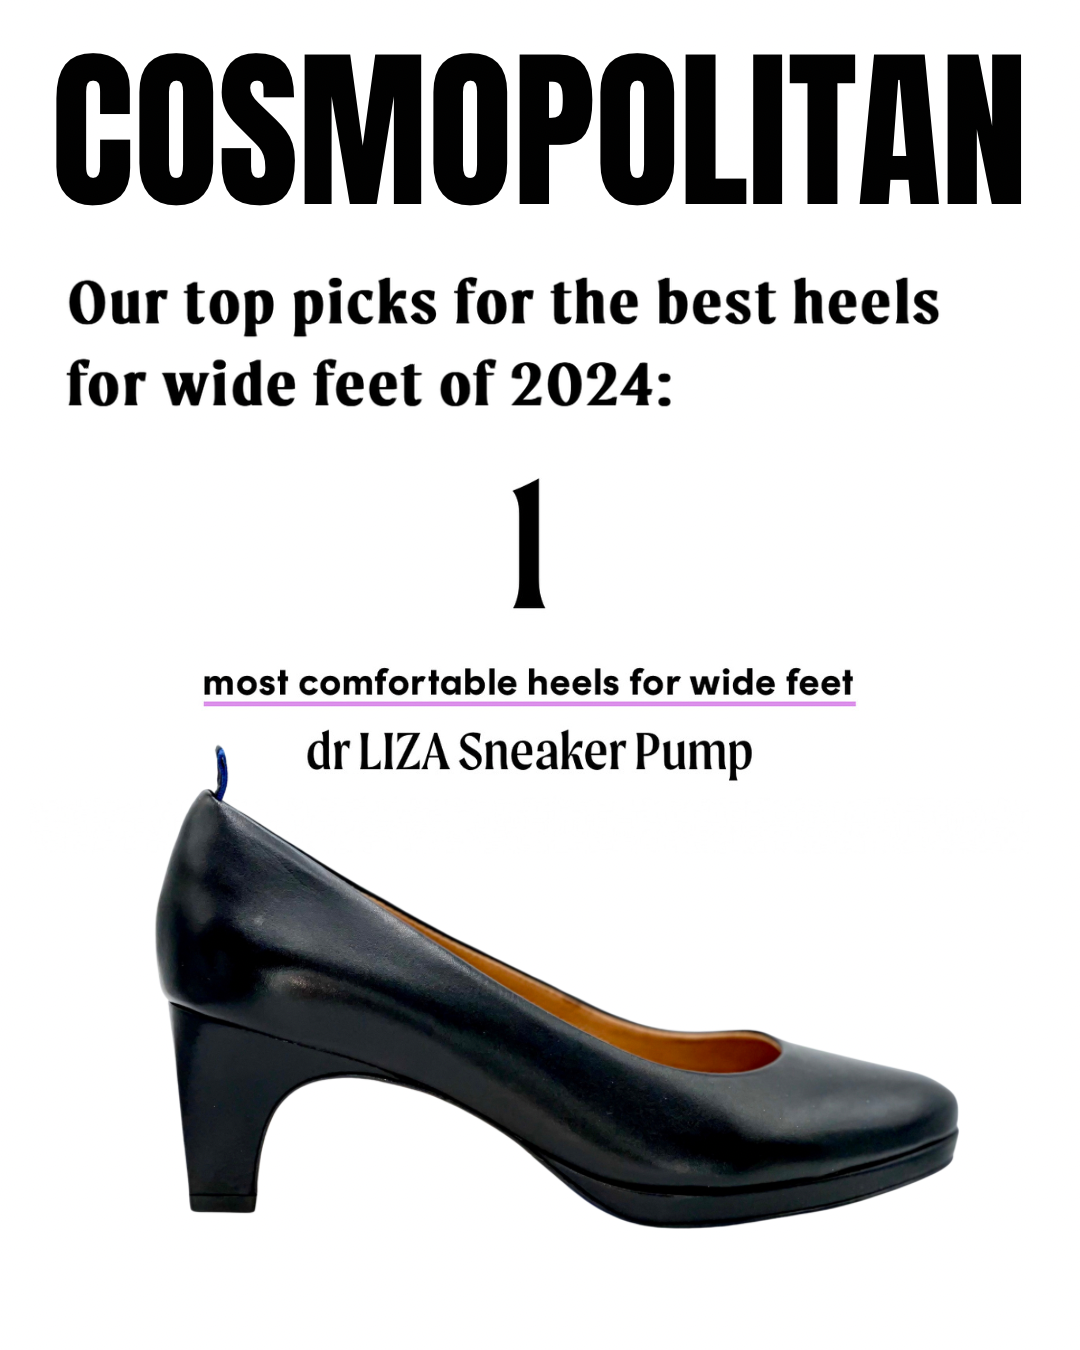 Cosmopolitan Names the dr LIZA Sneaker Pumps the Most Comfortable Heels For Wide Feet